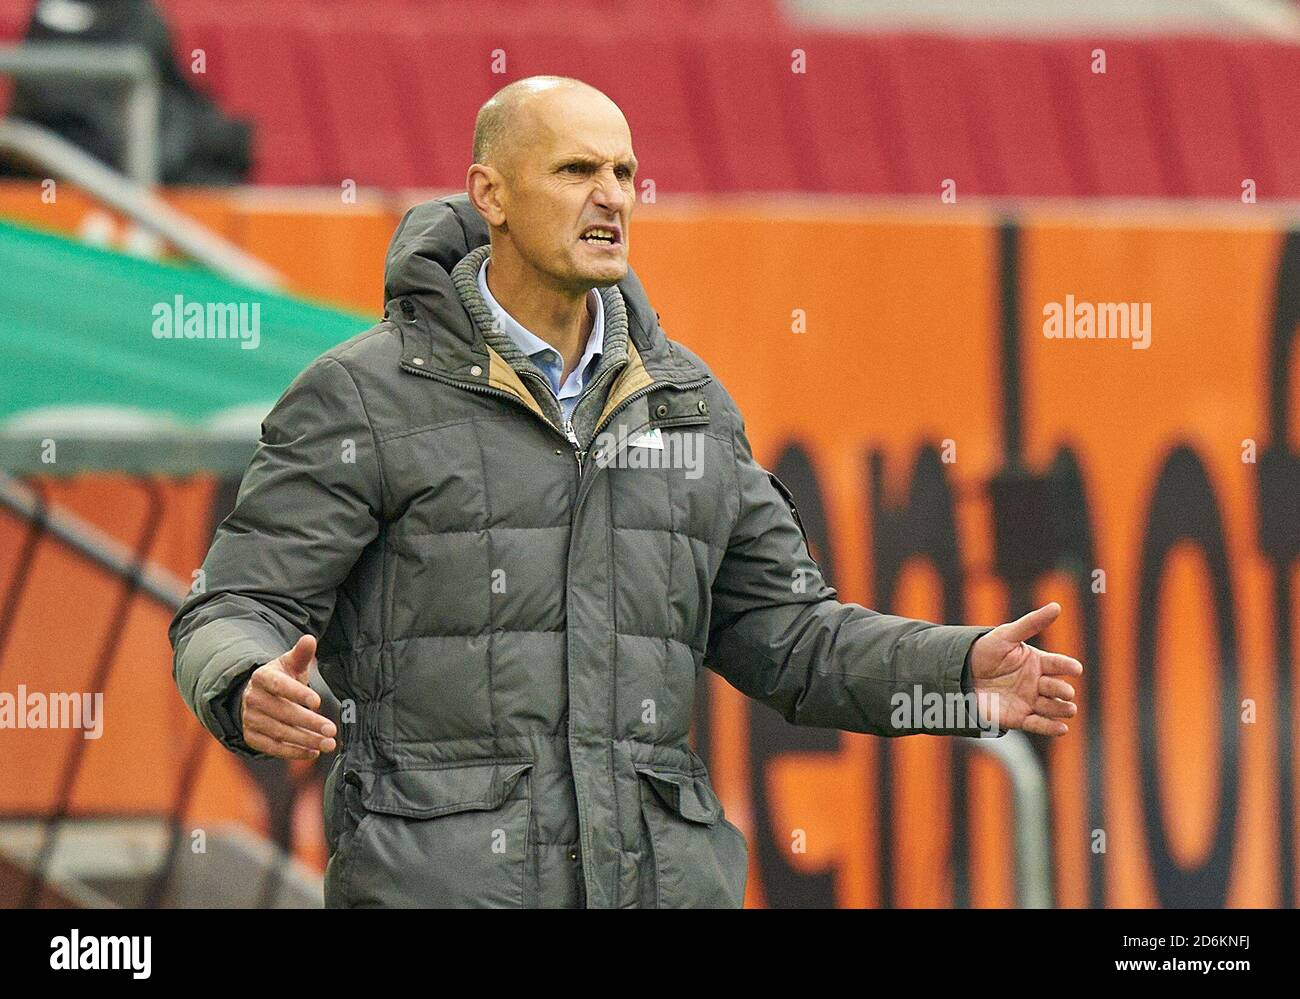 Heiko HERRLICH, FCA coach,  geste FC AUGSBURG - RB LEIPZIG 0-2 1.German Football League , Augsburg, October 17, 2020.  Season 2020/2021, match day 04,  © Peter Schatz / Alamy Live News    - DFL REGULATIONS PROHIBIT ANY USE OF PHOTOGRAPHS as IMAGE SEQUENCES and/or QUASI-VIDEO - Stock Photo